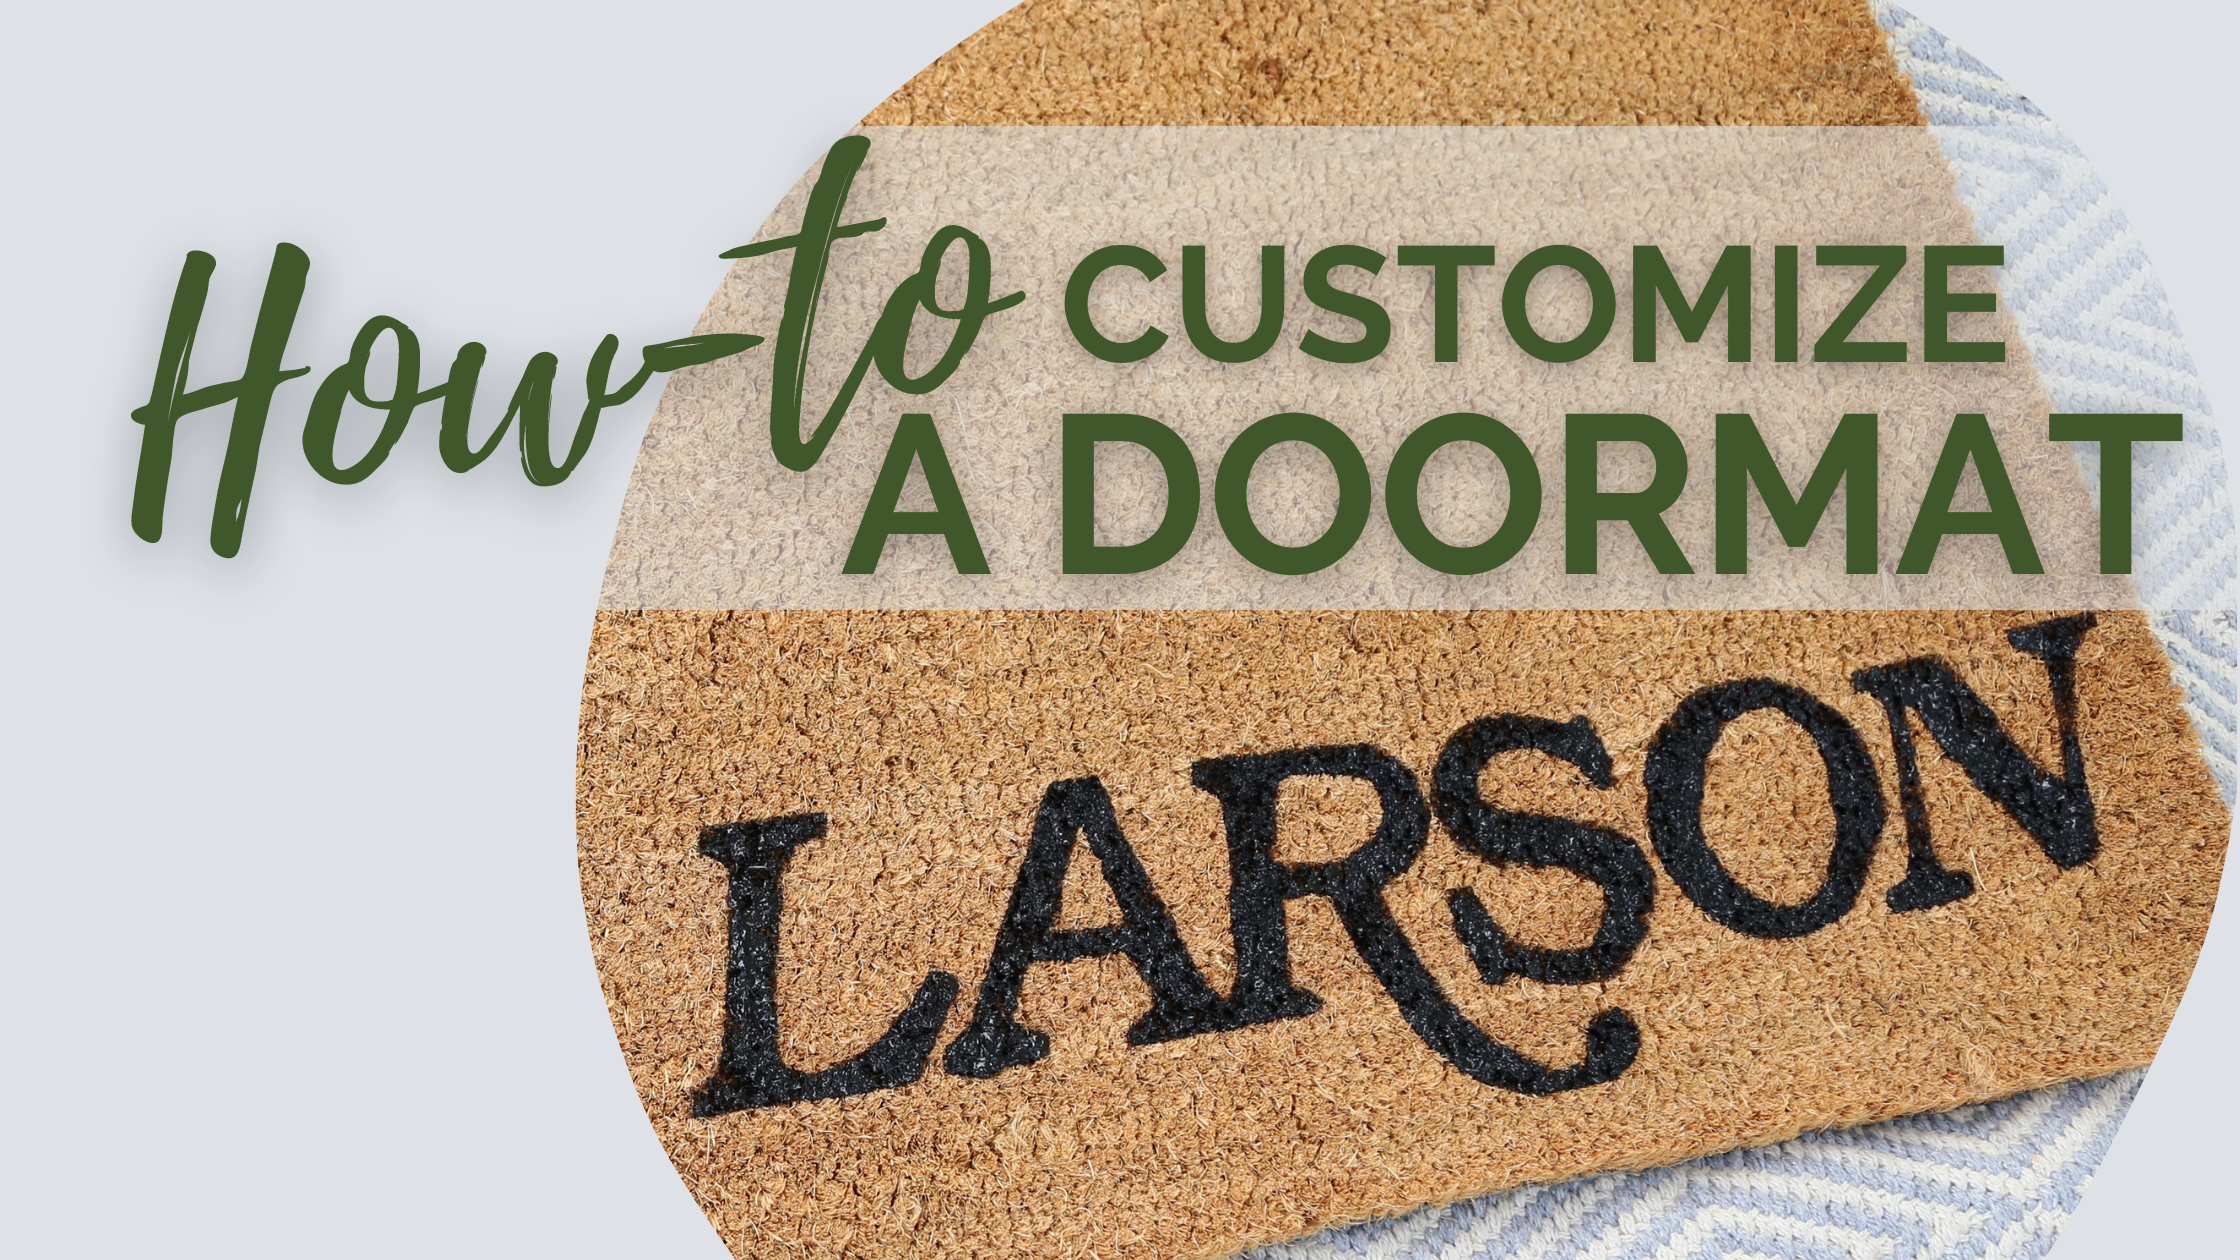 How-to Customize a Doormat